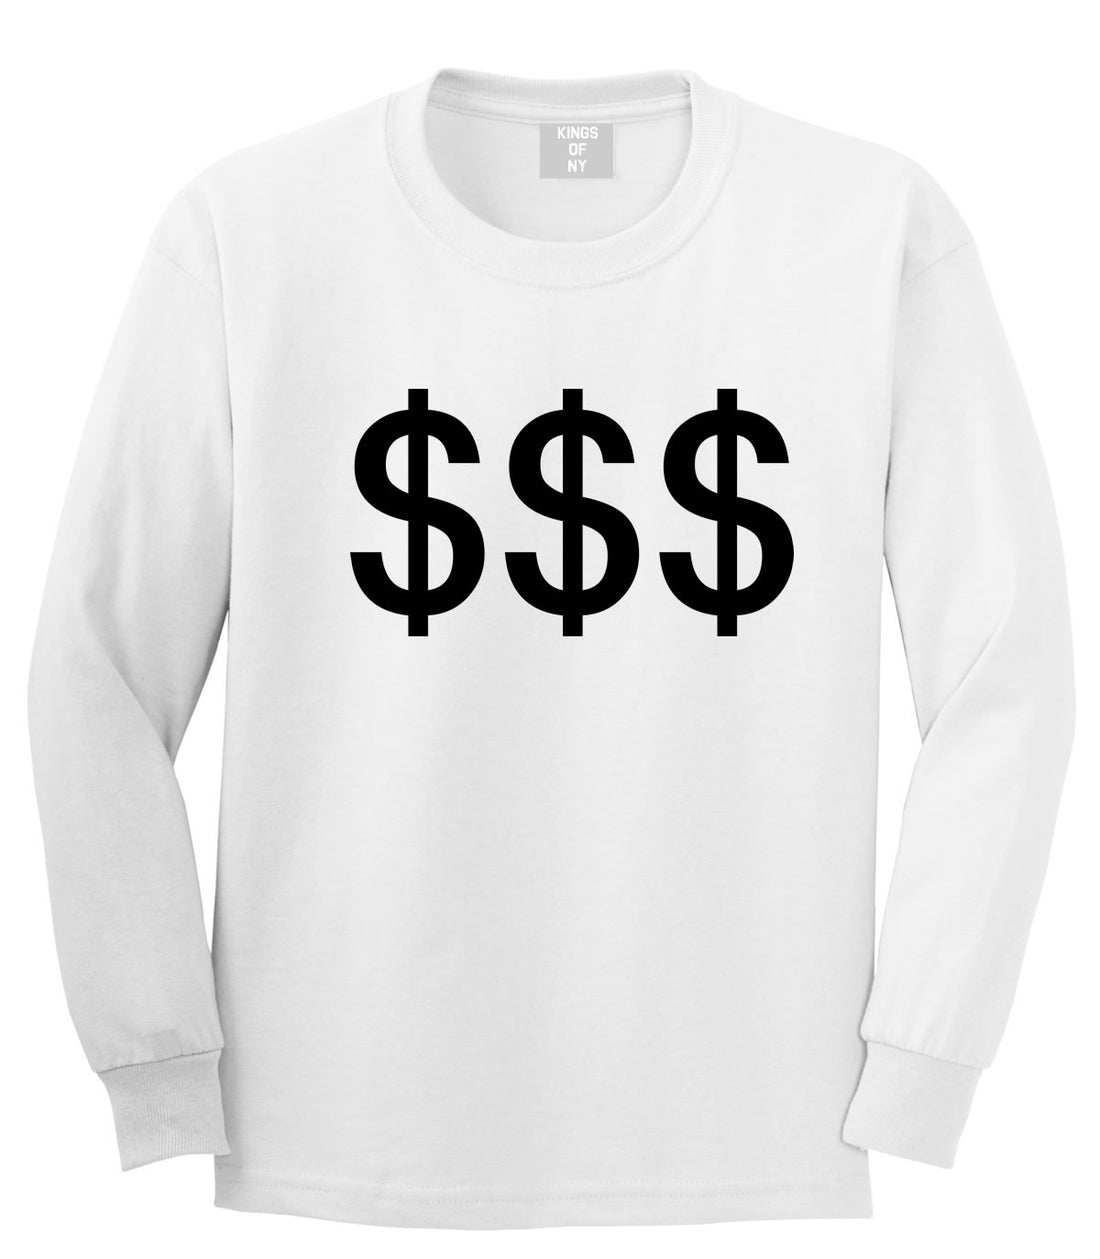 Kings Of NY Money Signs Long Sleeve T-Shirt in White